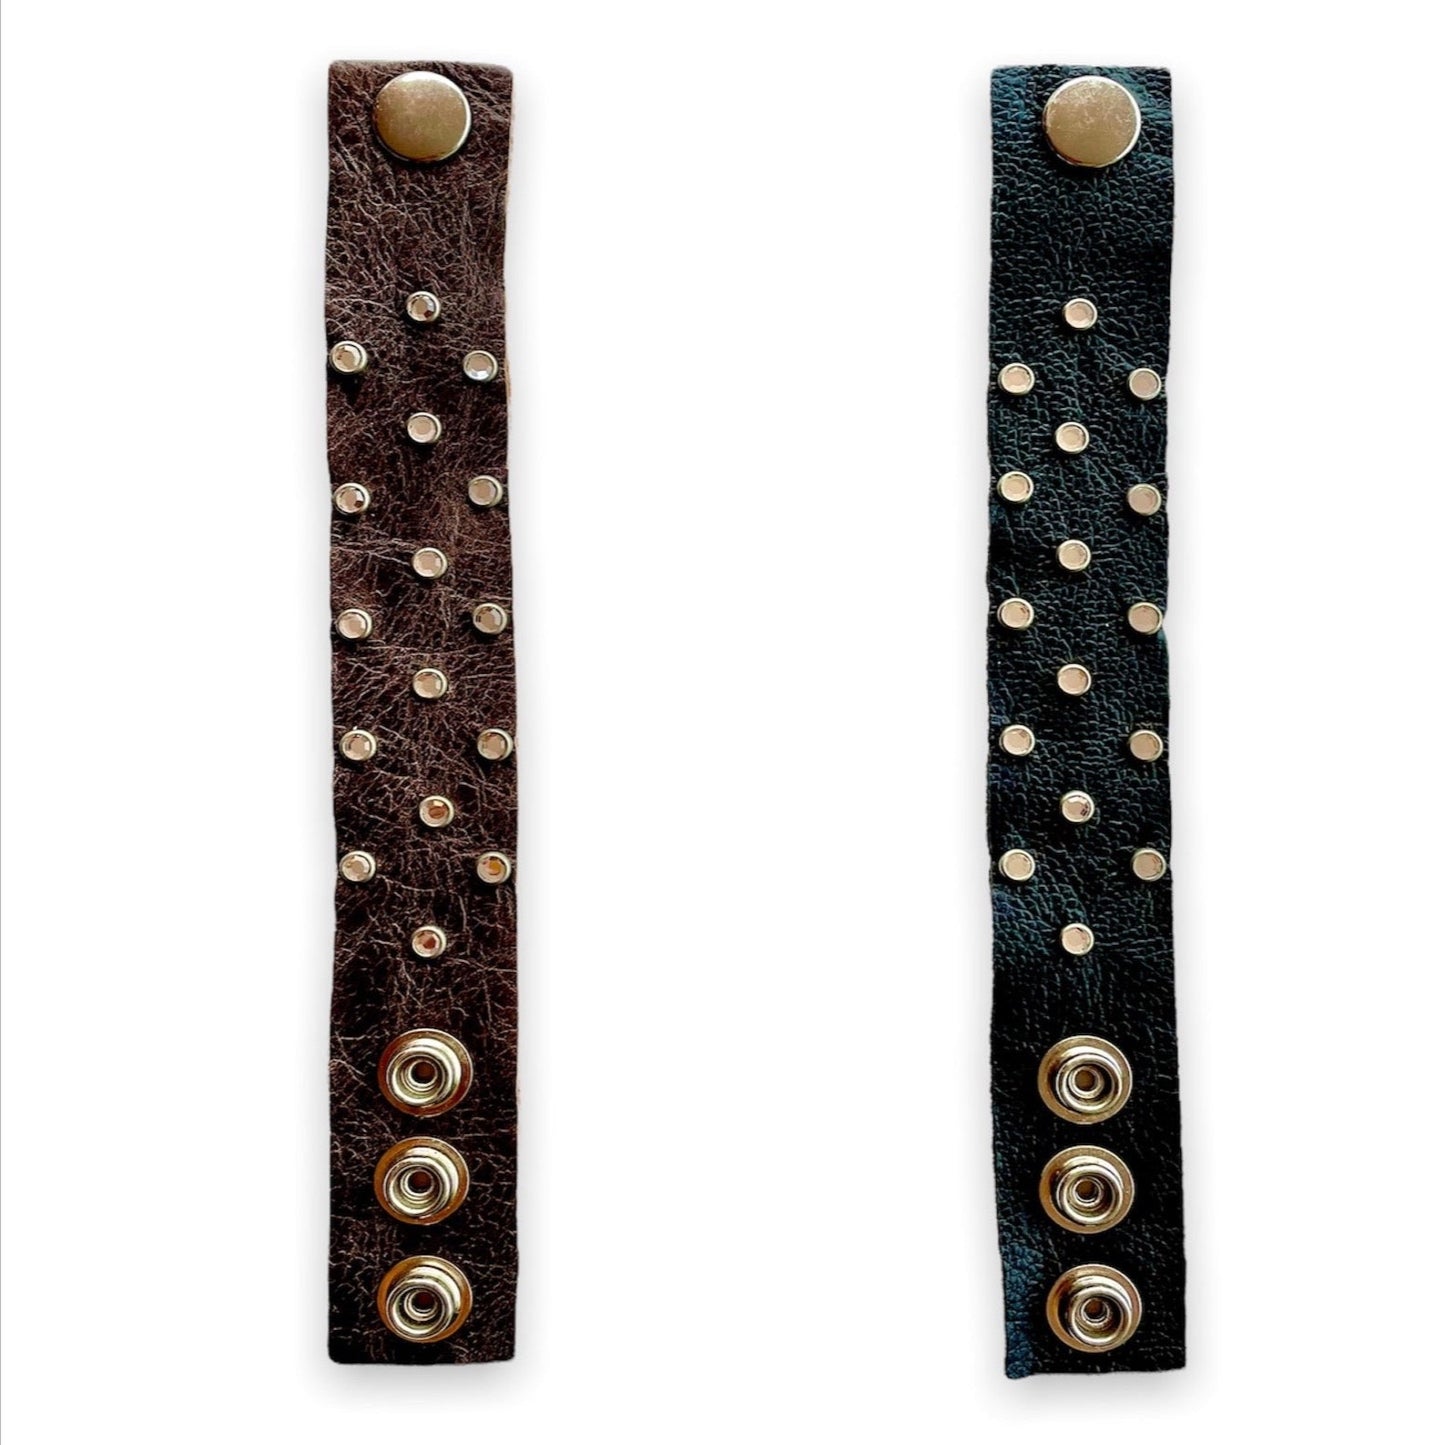 1" studded leather cuff bracelet - brown and black